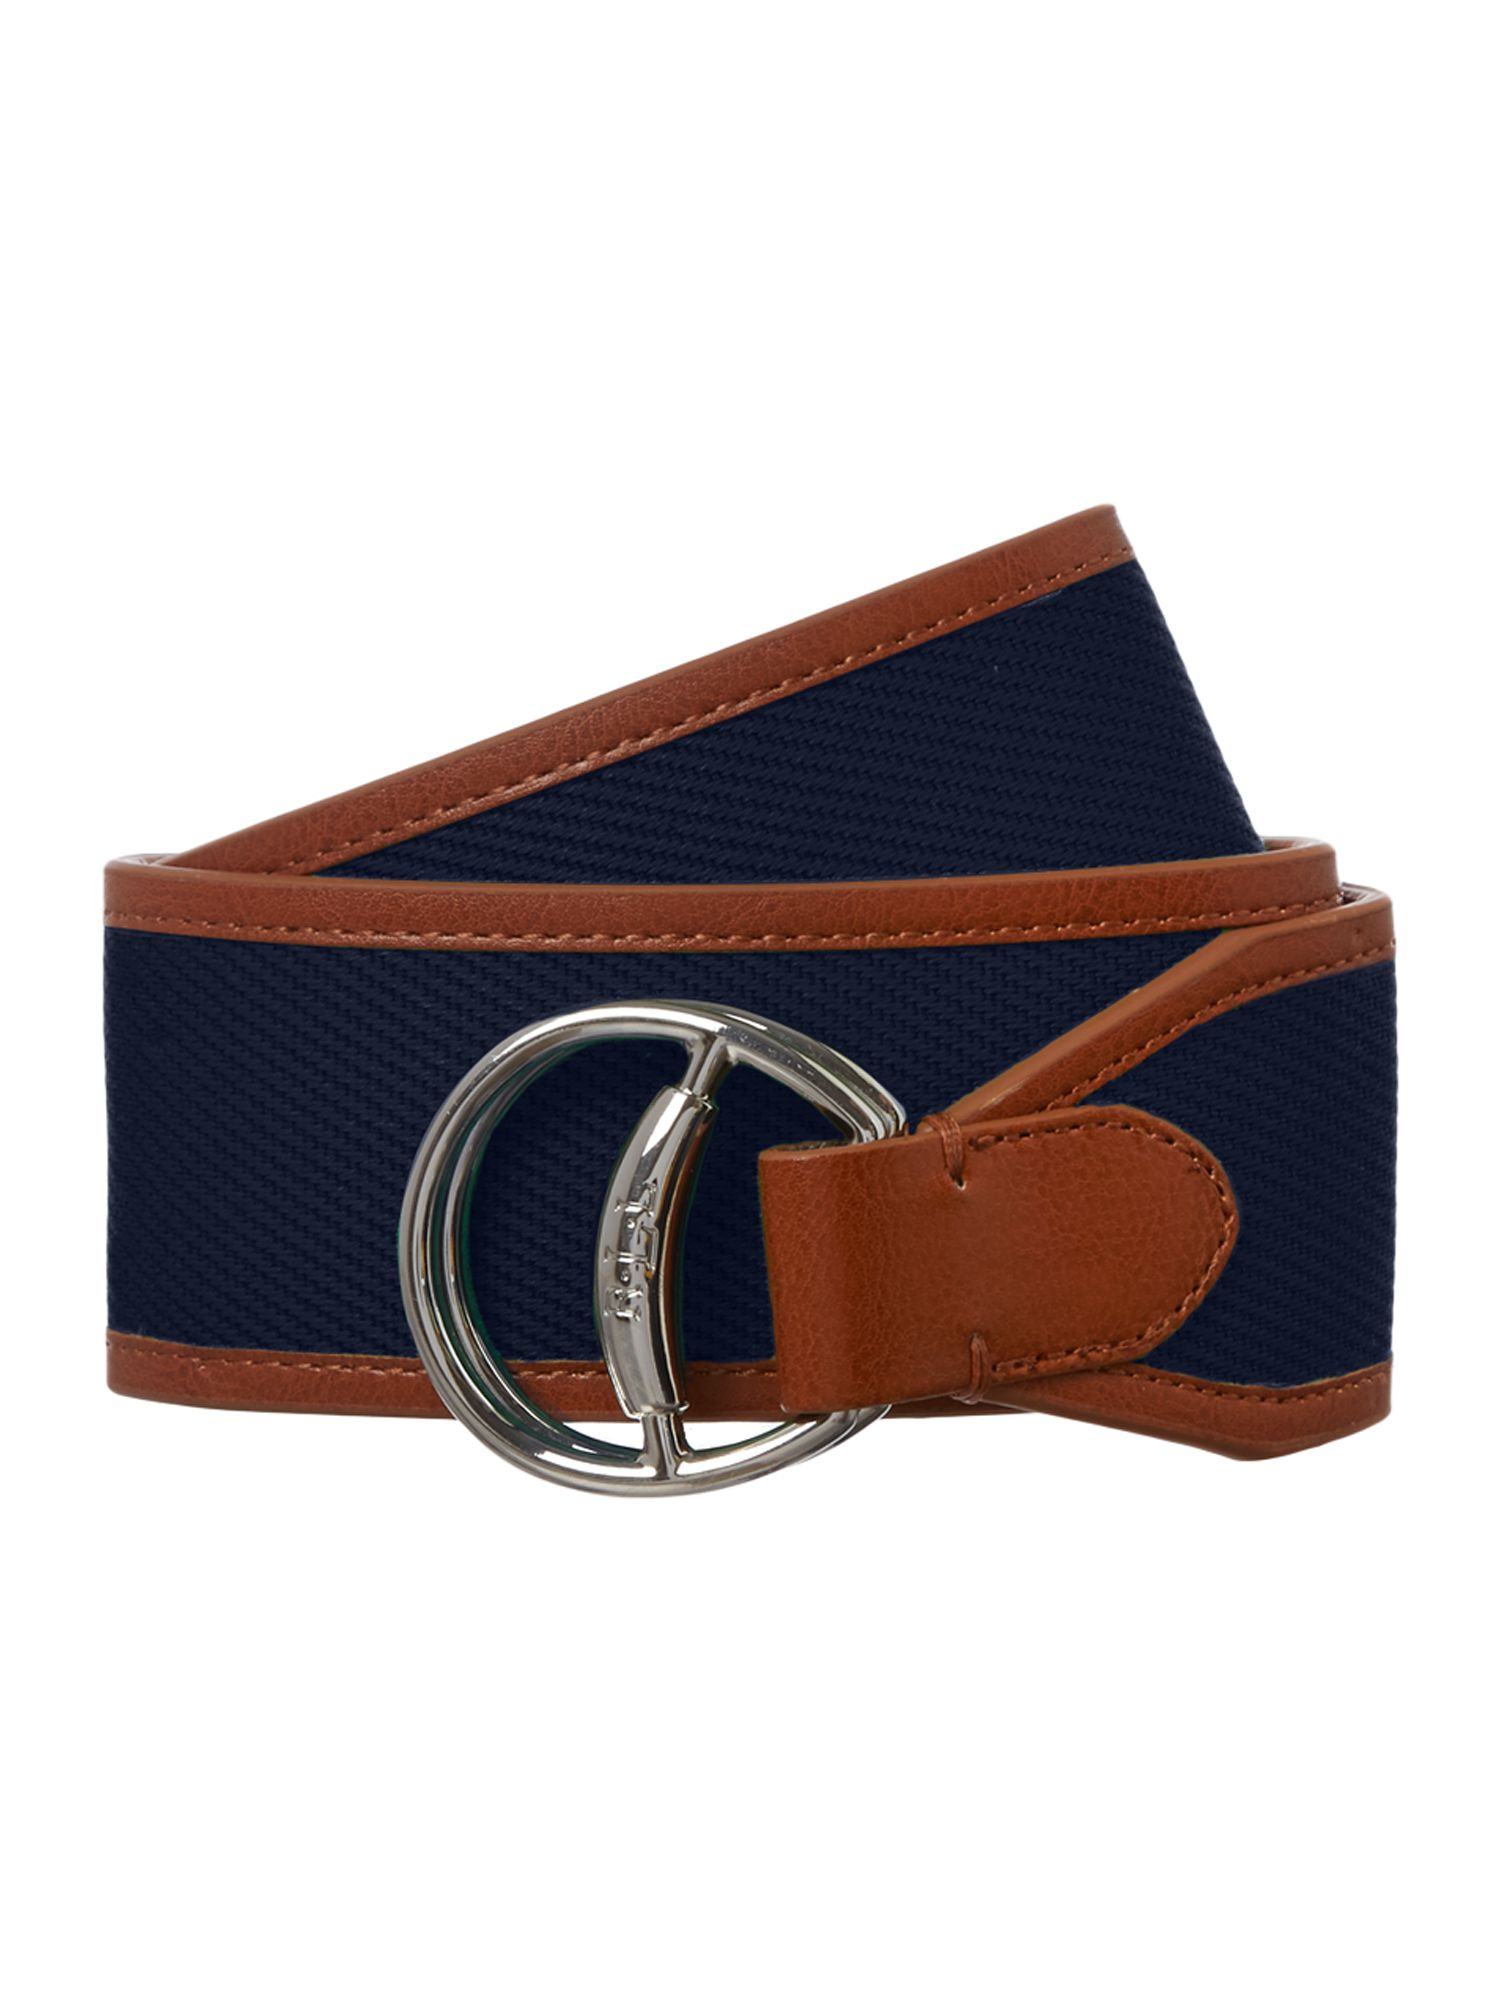 Lauren By Ralph Lauren Leather and Canvas Belt with Equestrian Detail in Blue (Navy) | Lyst